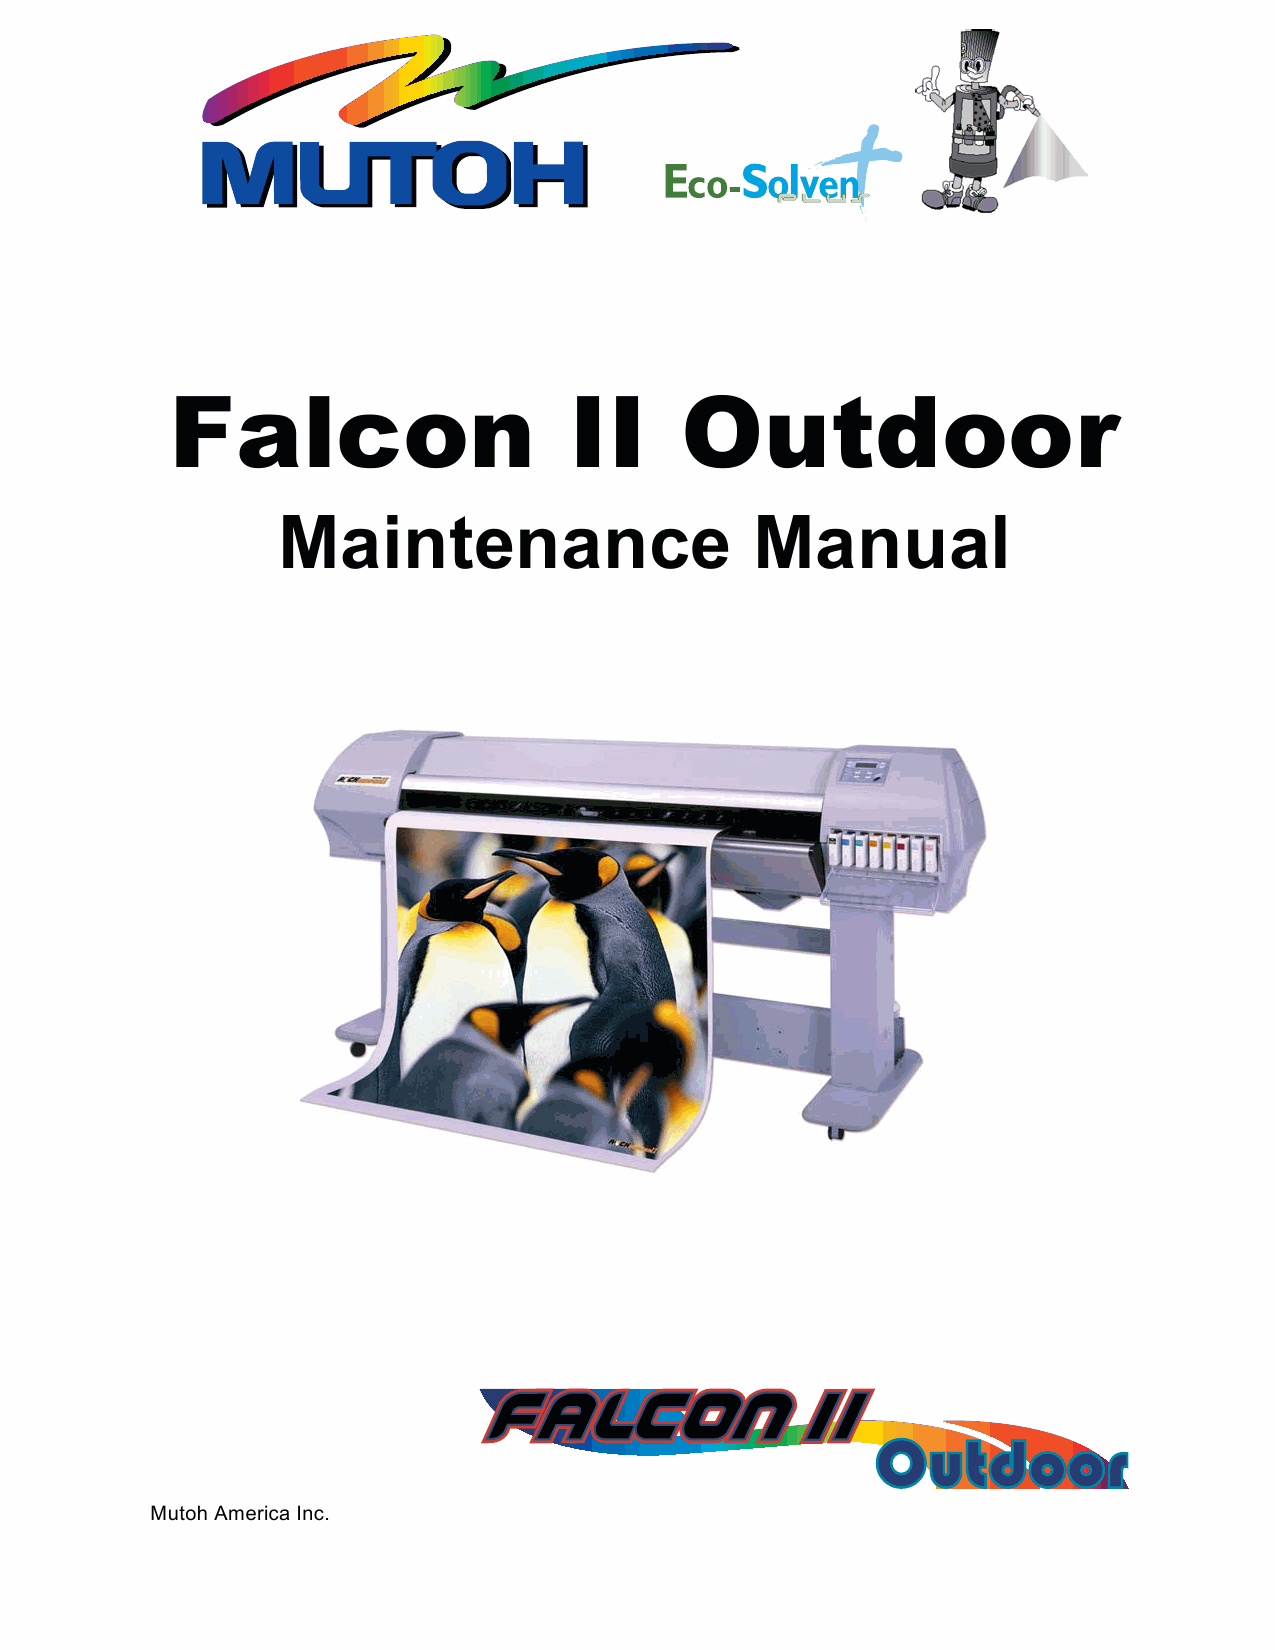 MUTOH FalconII Outdoor Service Manual-1